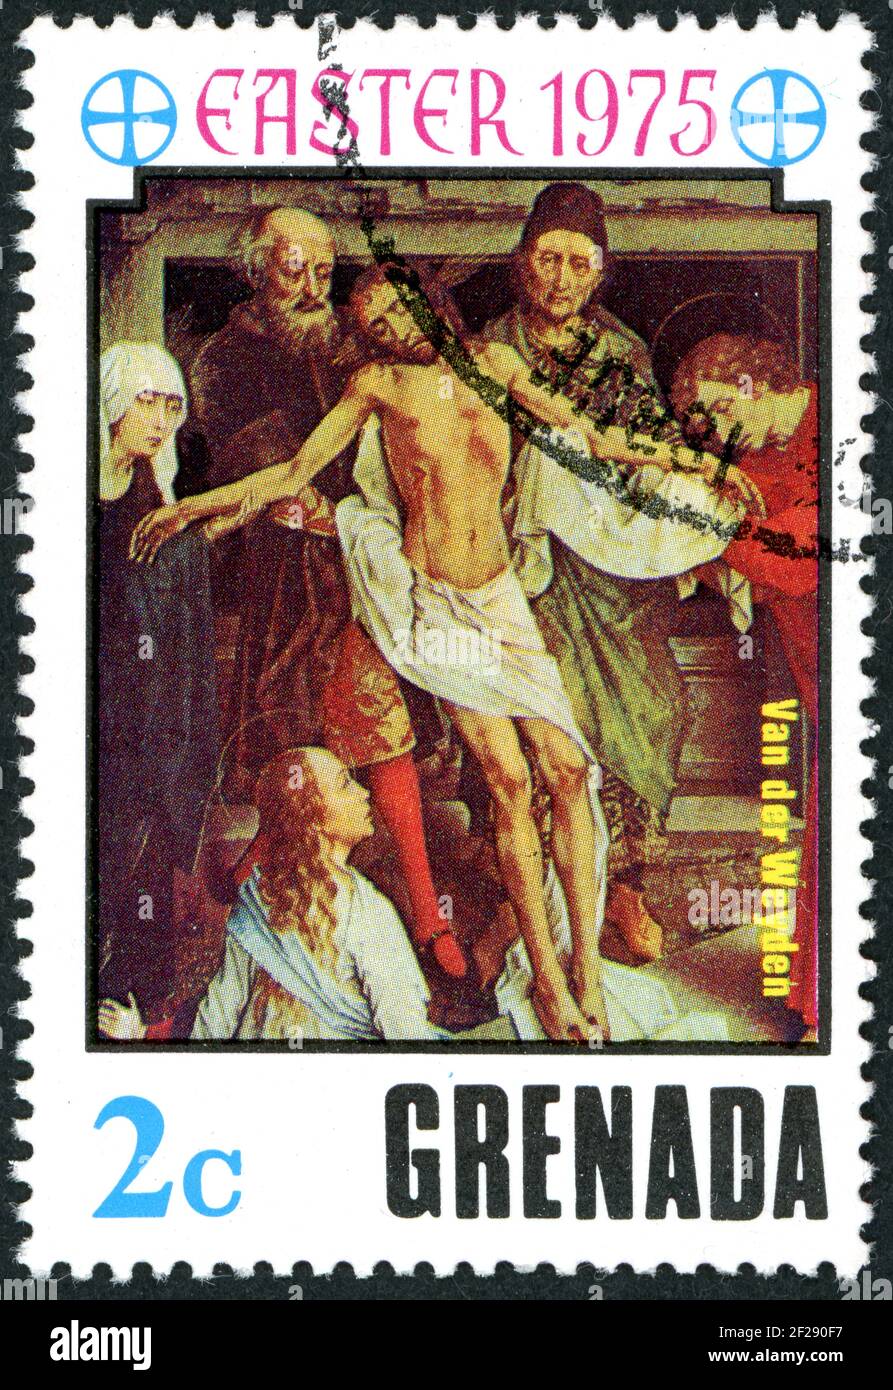 GRENADA - CIRCA 1975: A stamp printed in Grenada, shown the painting by Rogier van der Weyden - The Deposition, circa 1975 Stock Photo